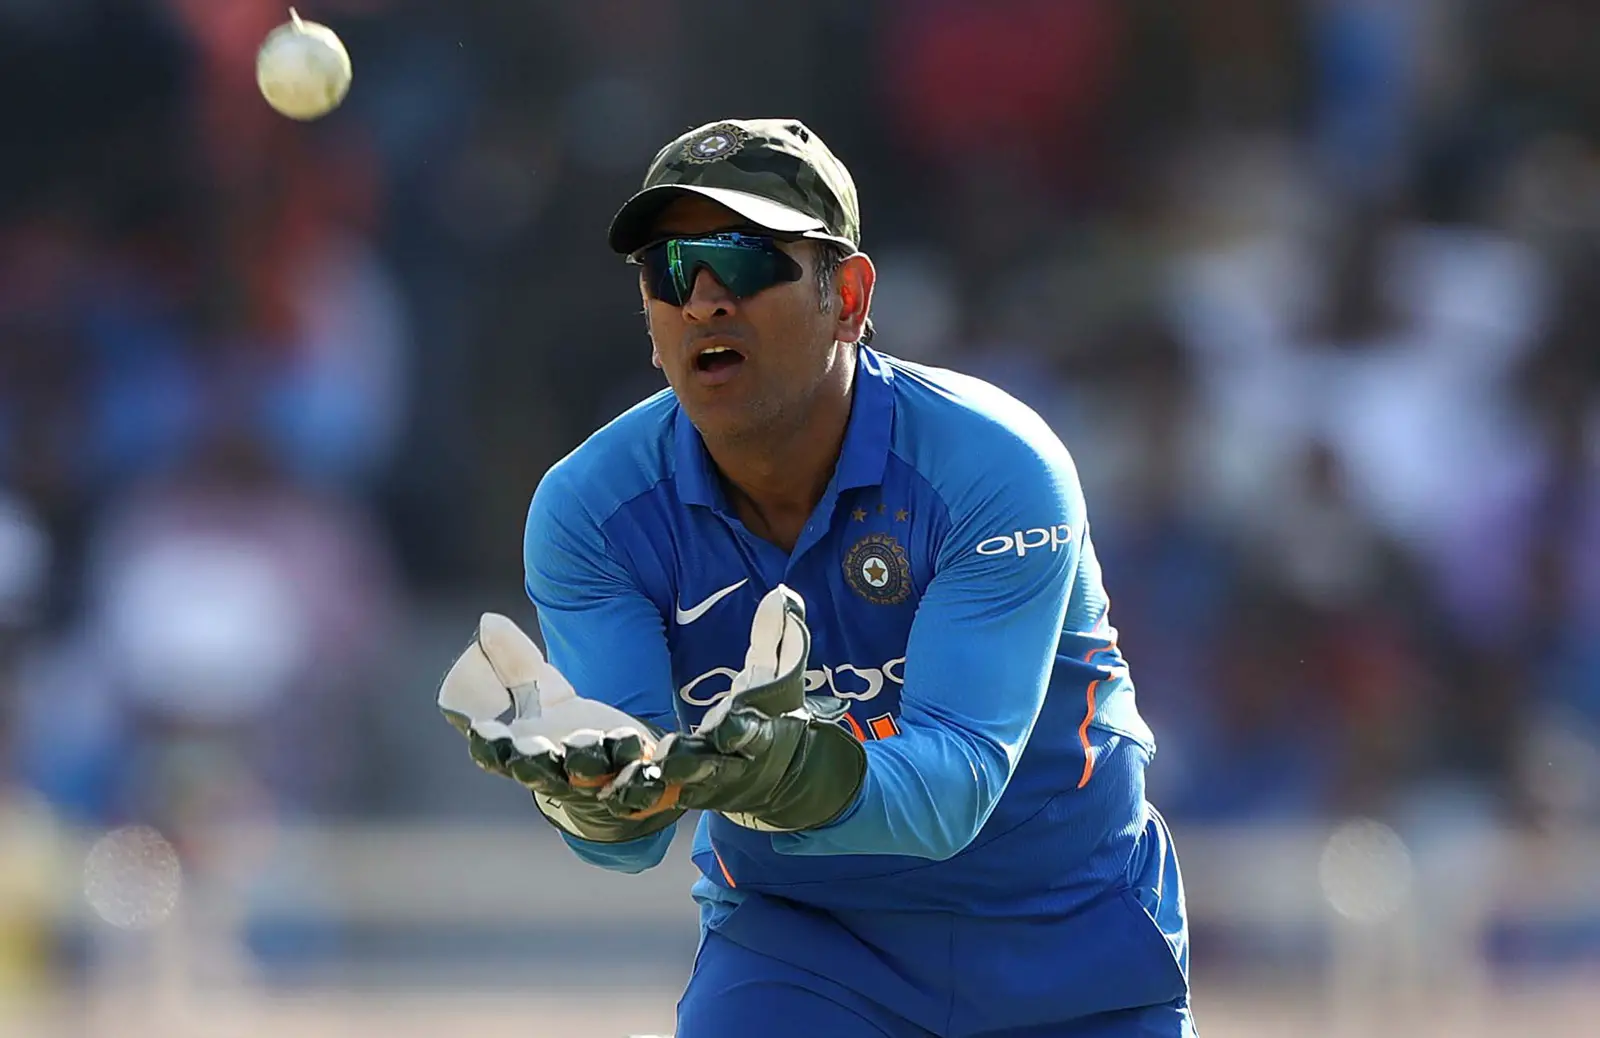 Dhoni shall be called to T20 World Cup's training camp: MSK Prasad